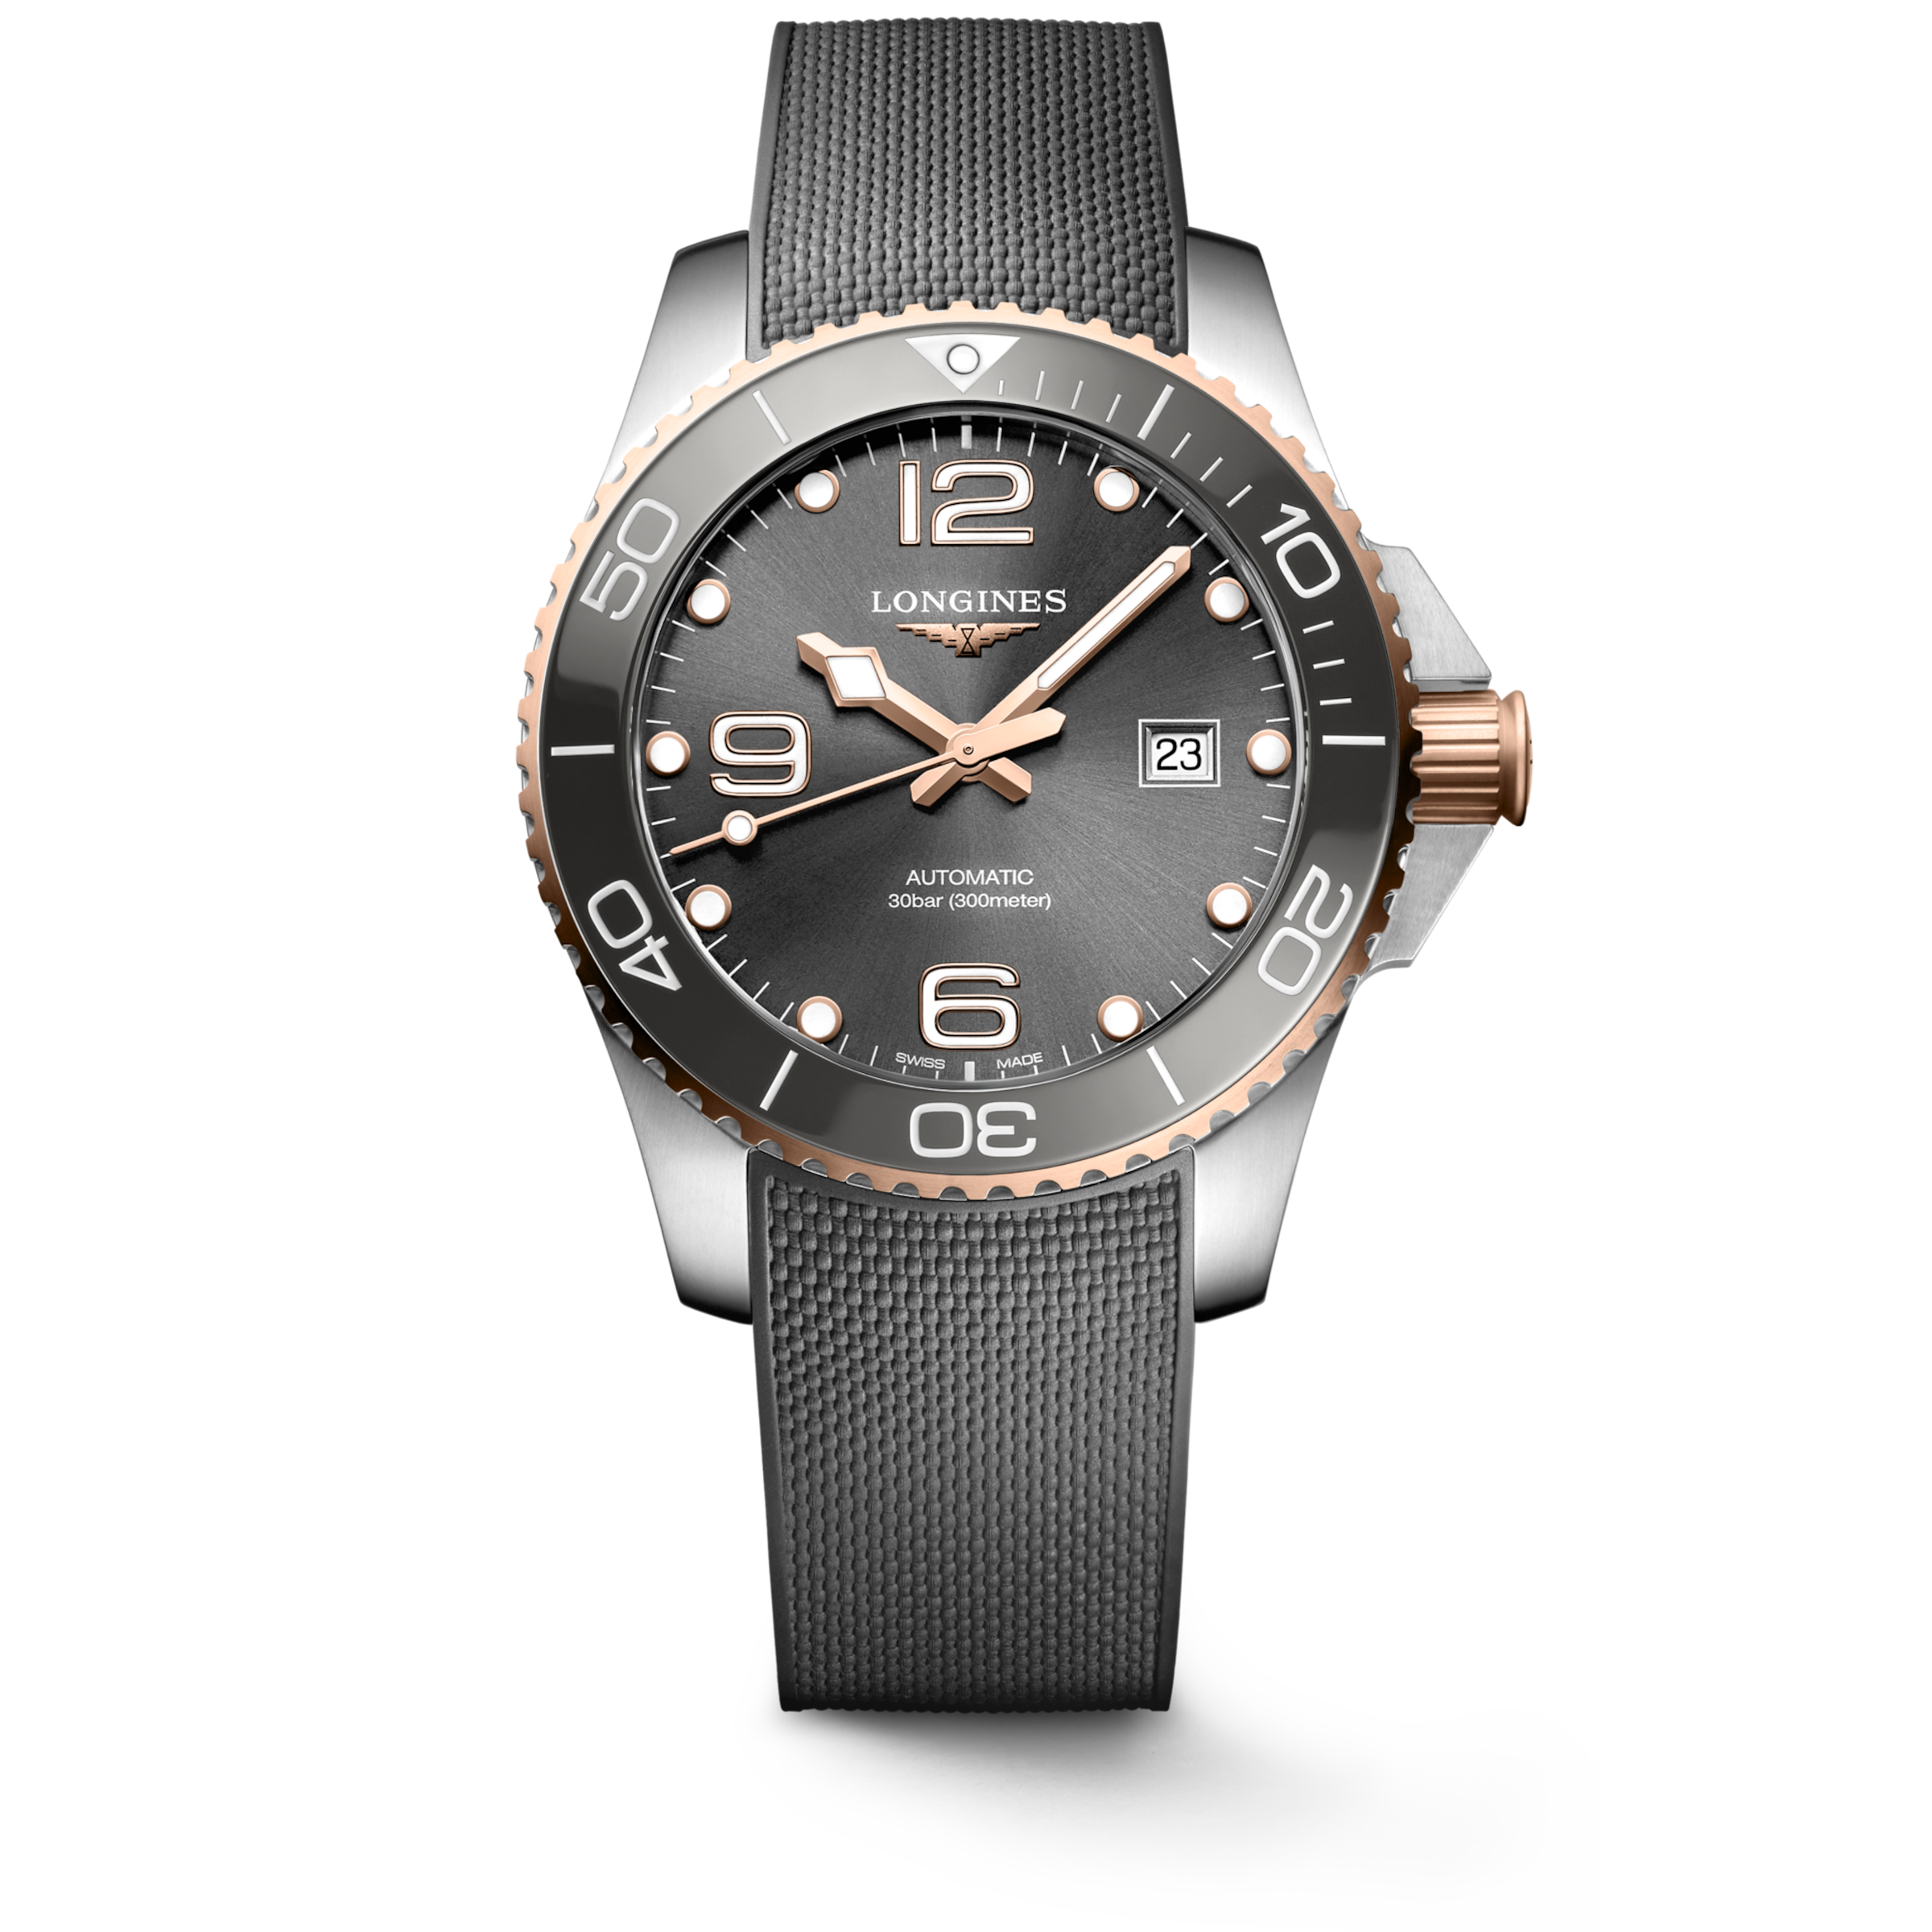 Longines HYDROCONQUEST Automatic Stainless steel and ceramic bezel Watch - L3.782.3.78.9